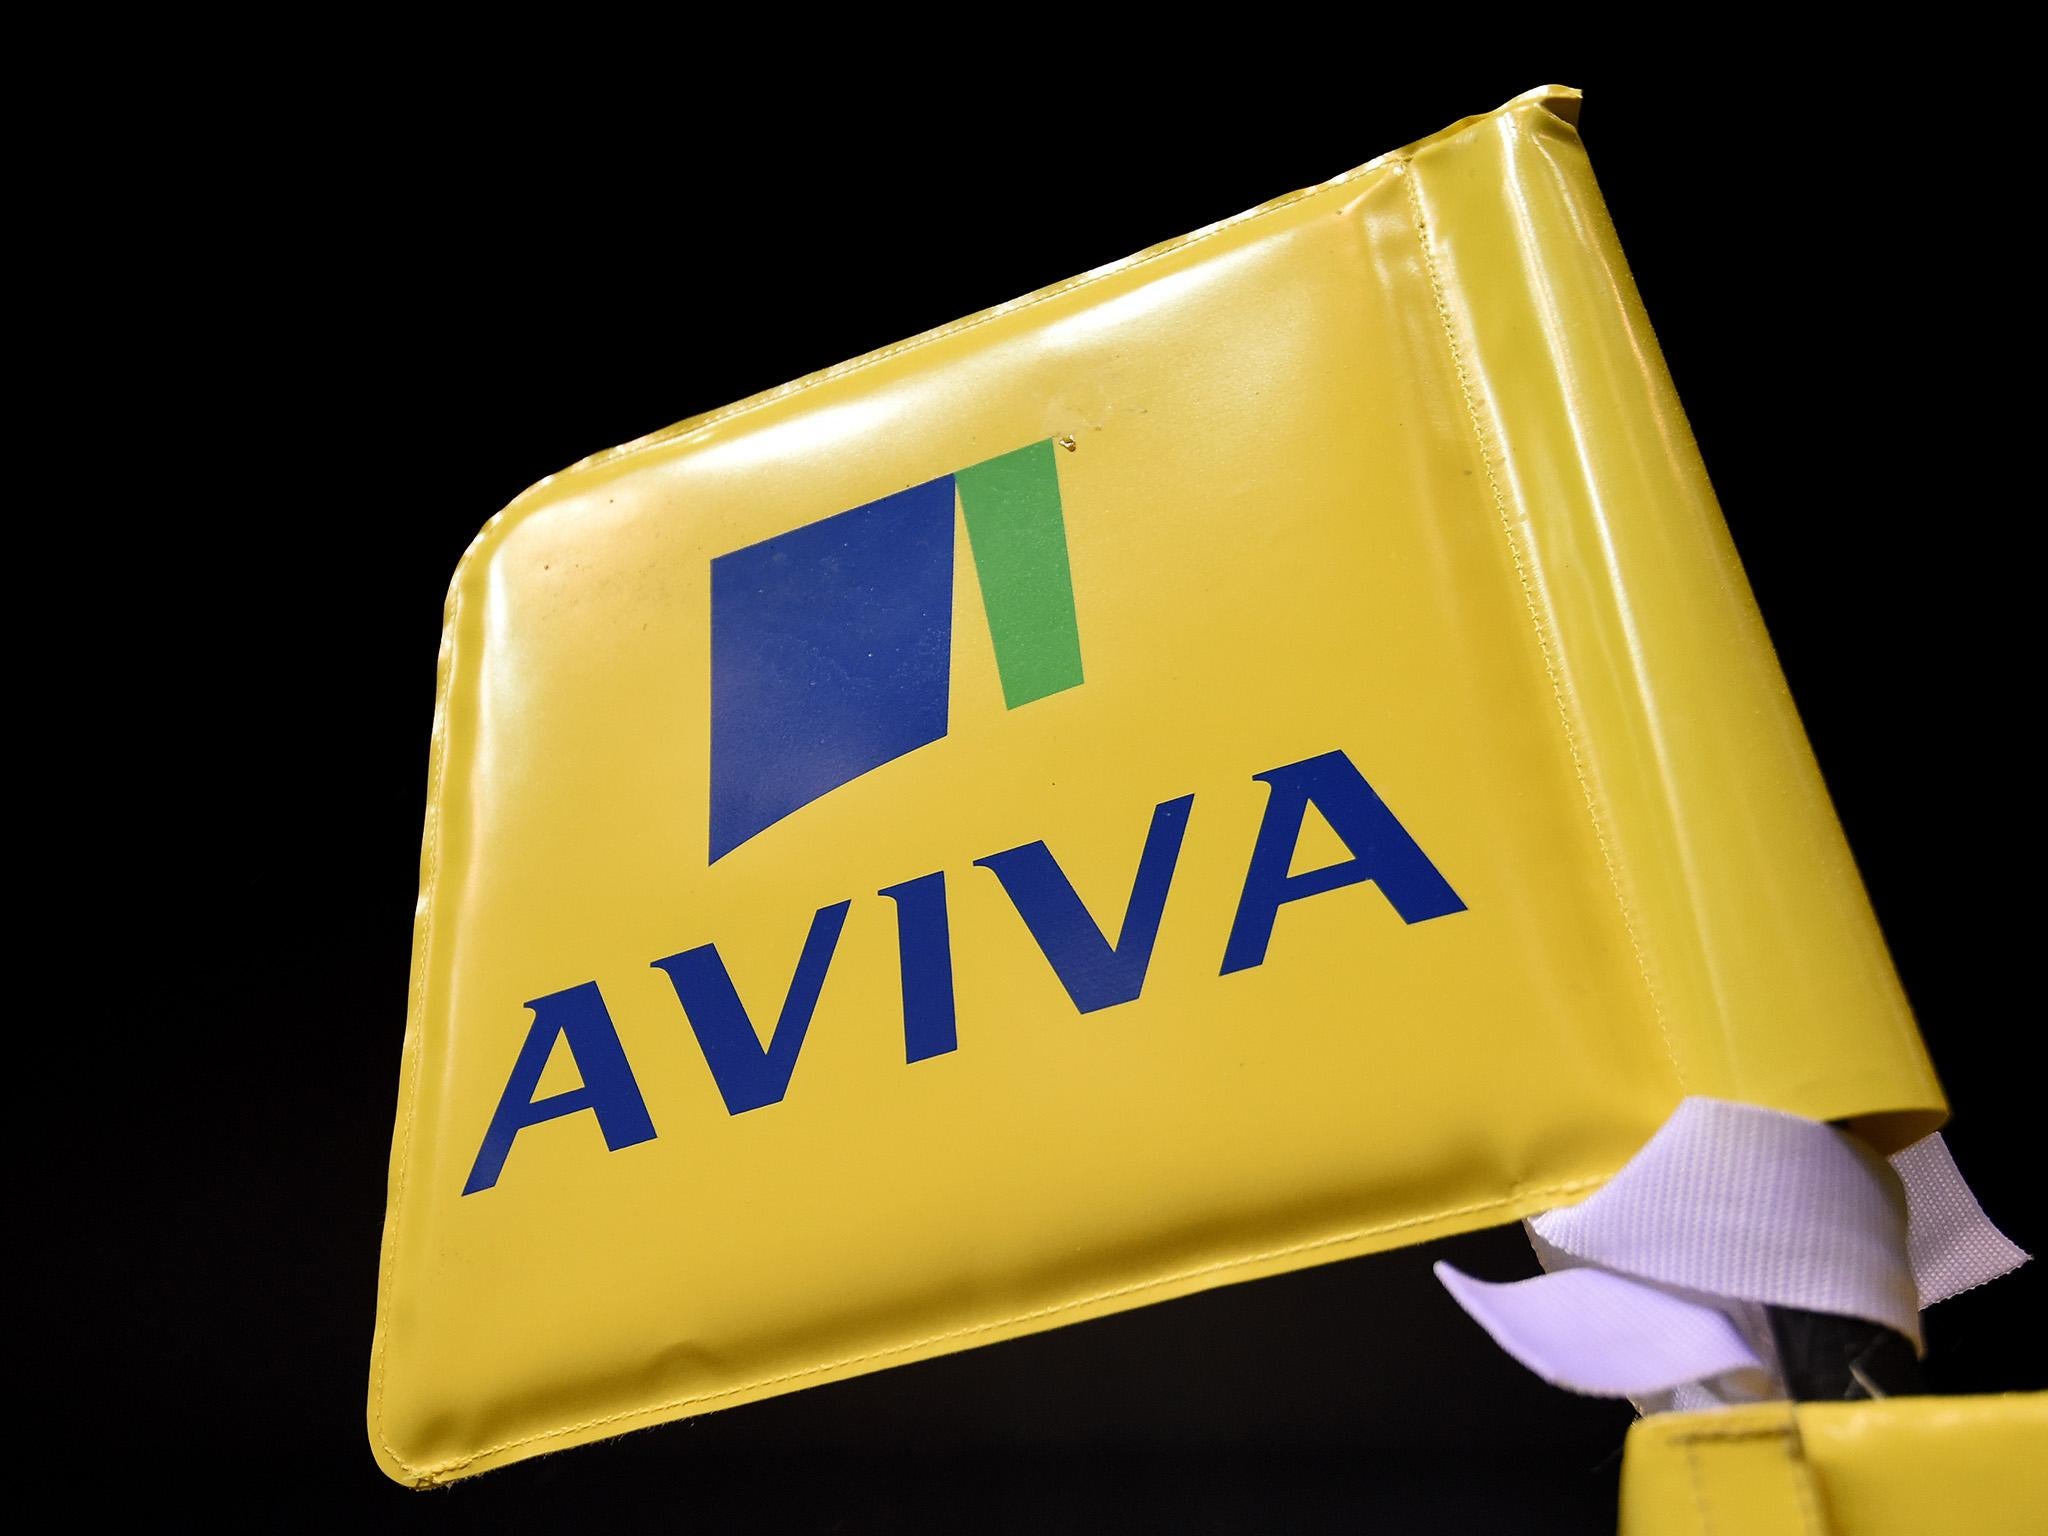 Aviva failed to comply with FCA rules that protect client's money for more than two years